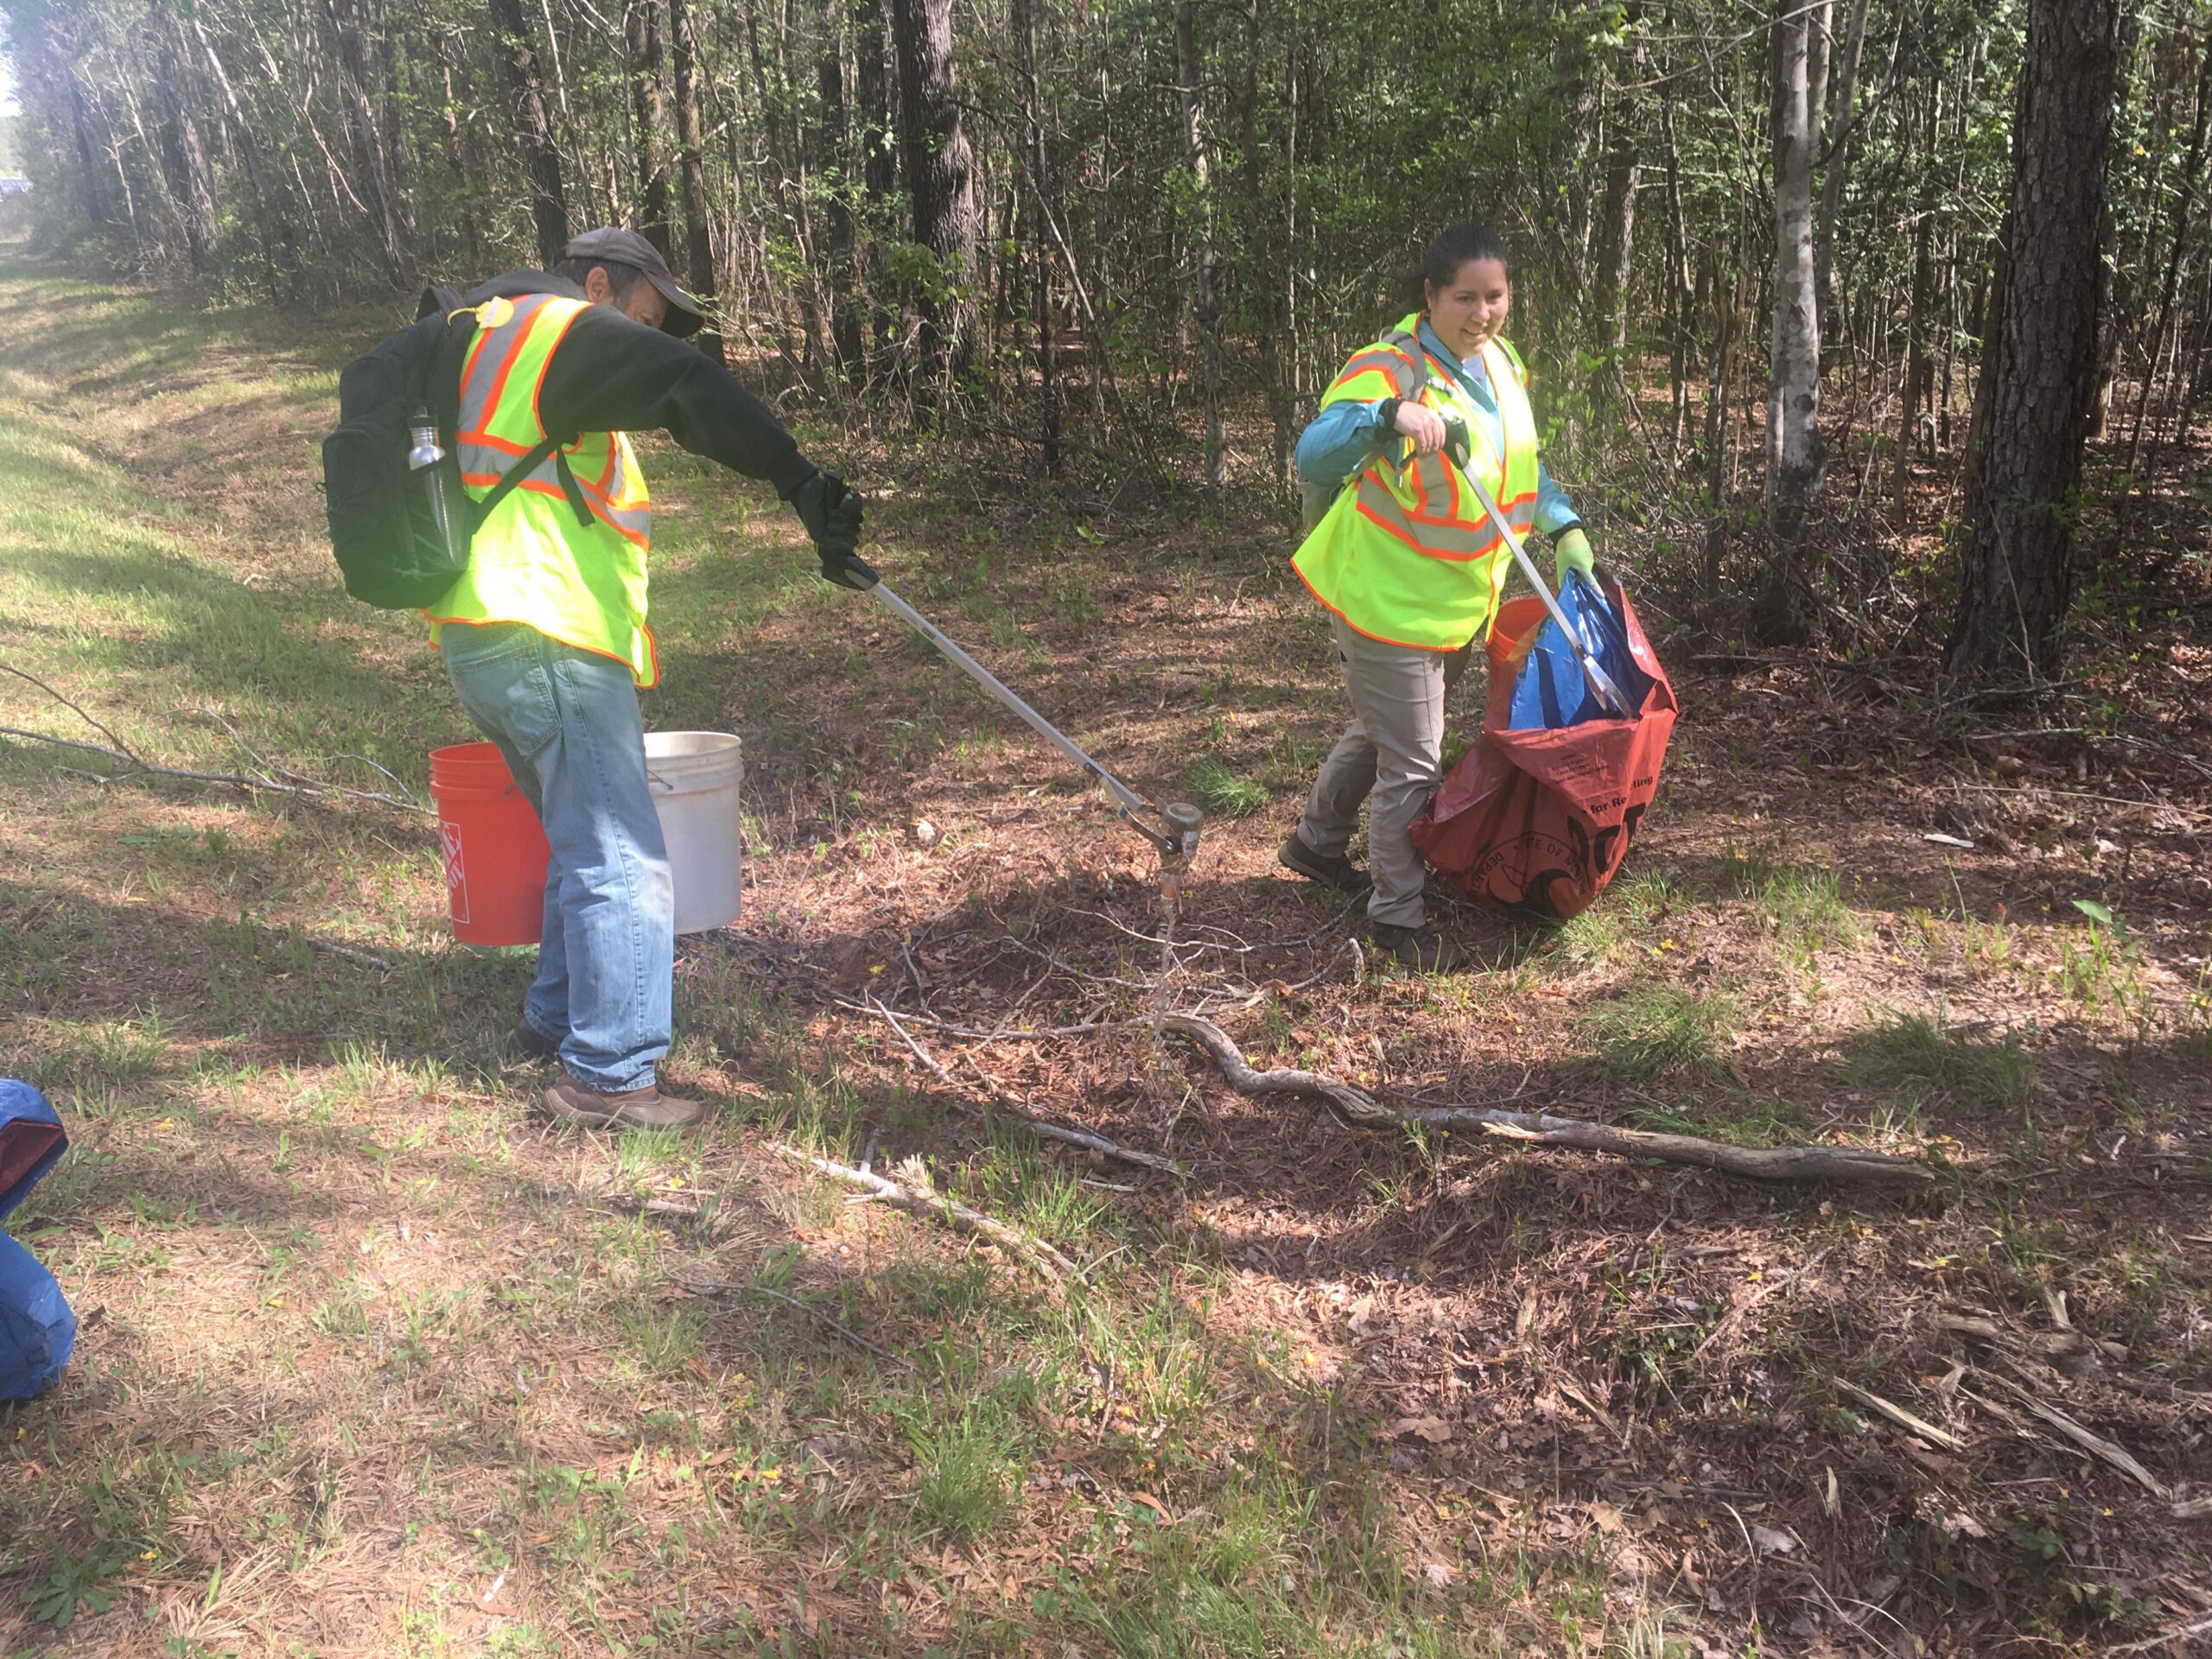 Two volunteers use pickers to clean up trash near the Upper Little River.